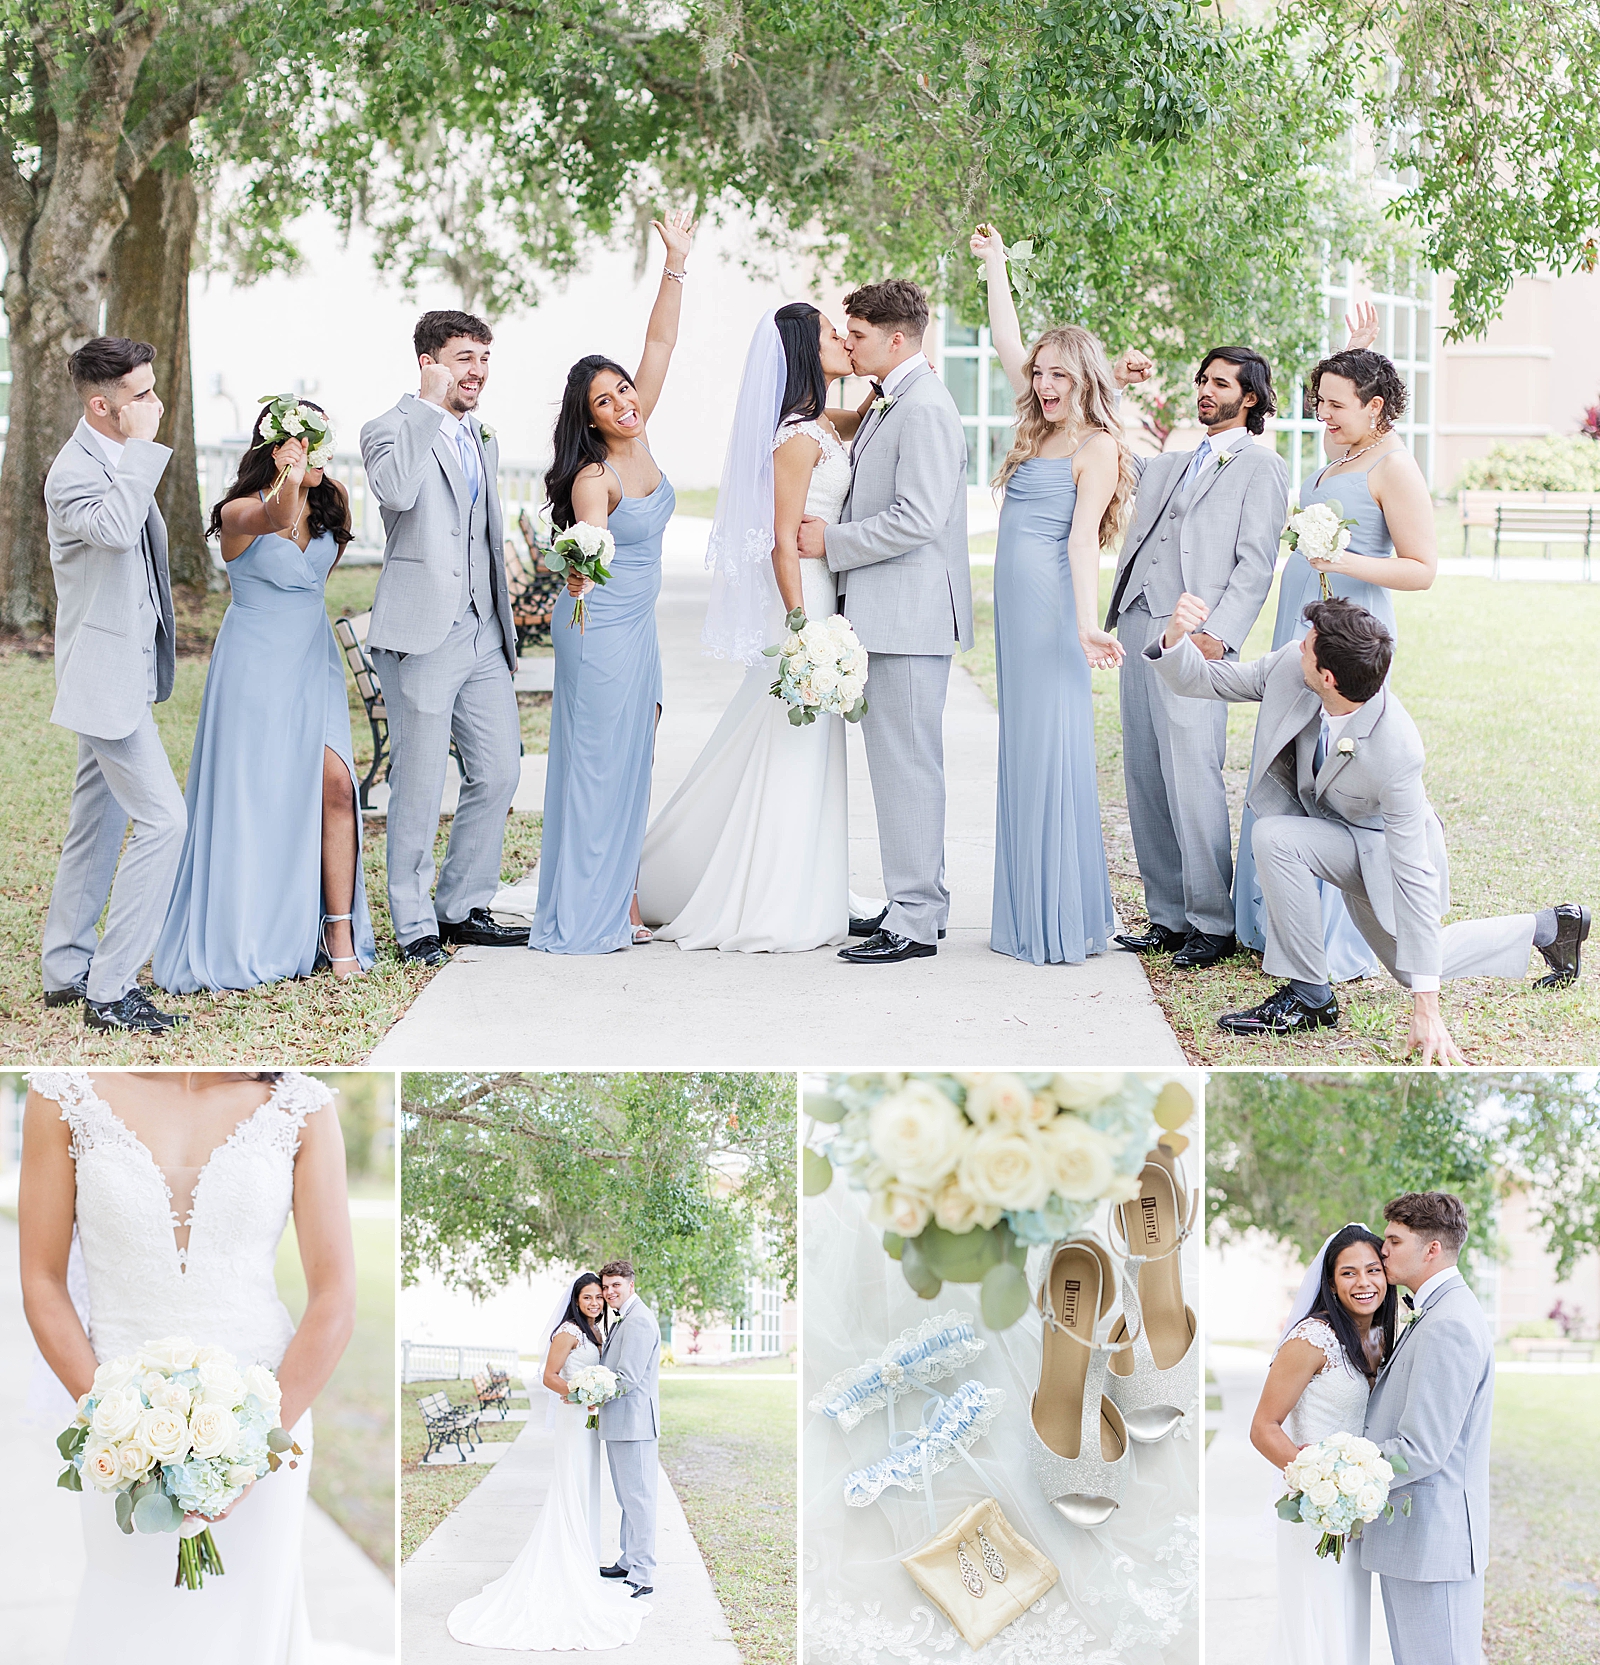 A gray and dusty blue wedding at the tabernacle church in sarasota, florida.